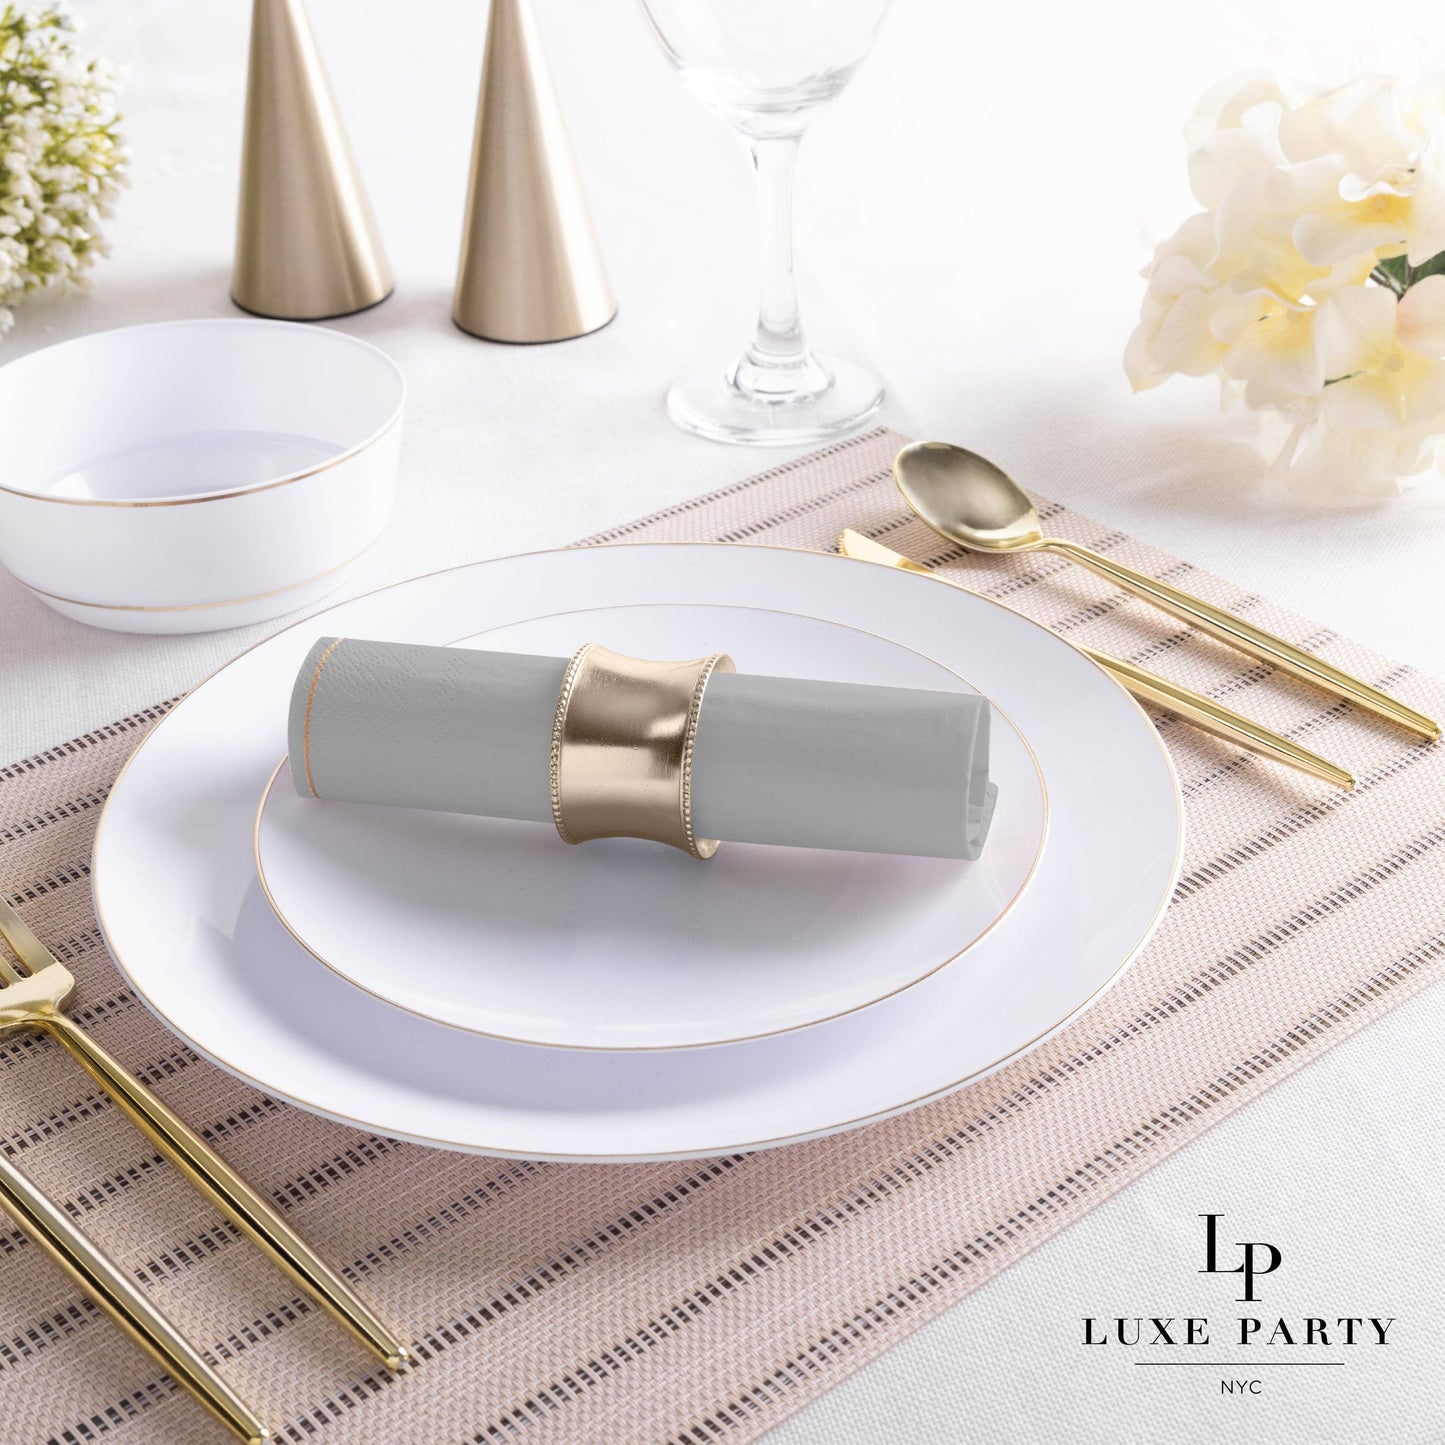 Grey with Gold Stripe Lunch Napkins | 20 Napkins: 20 Lunch Napkins - 6.5" x 6.5"